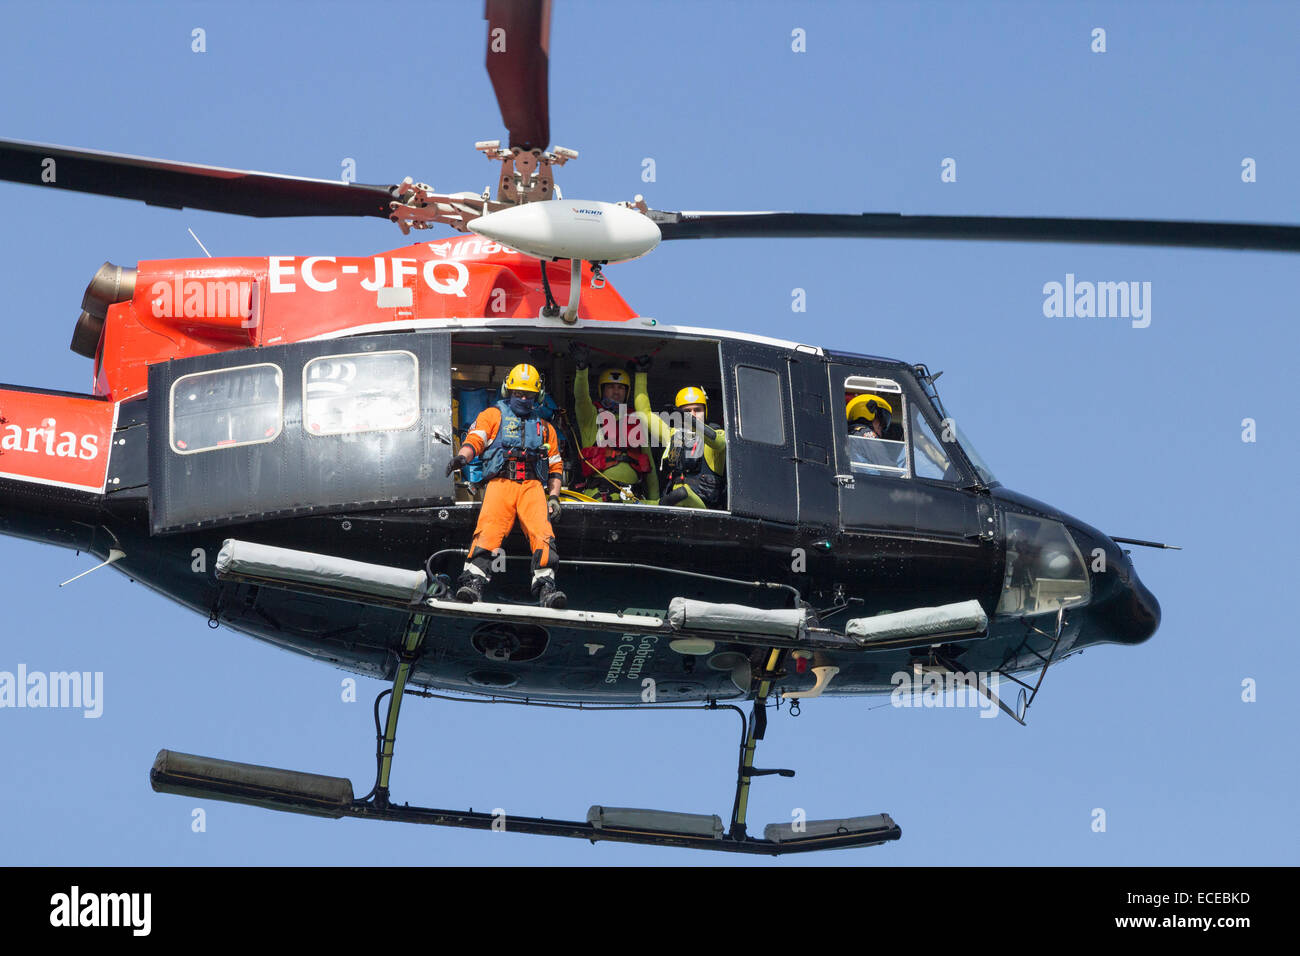 Spanish coastguard helicopter taking part in rescue services simulation on beach in Spain Stock Photo